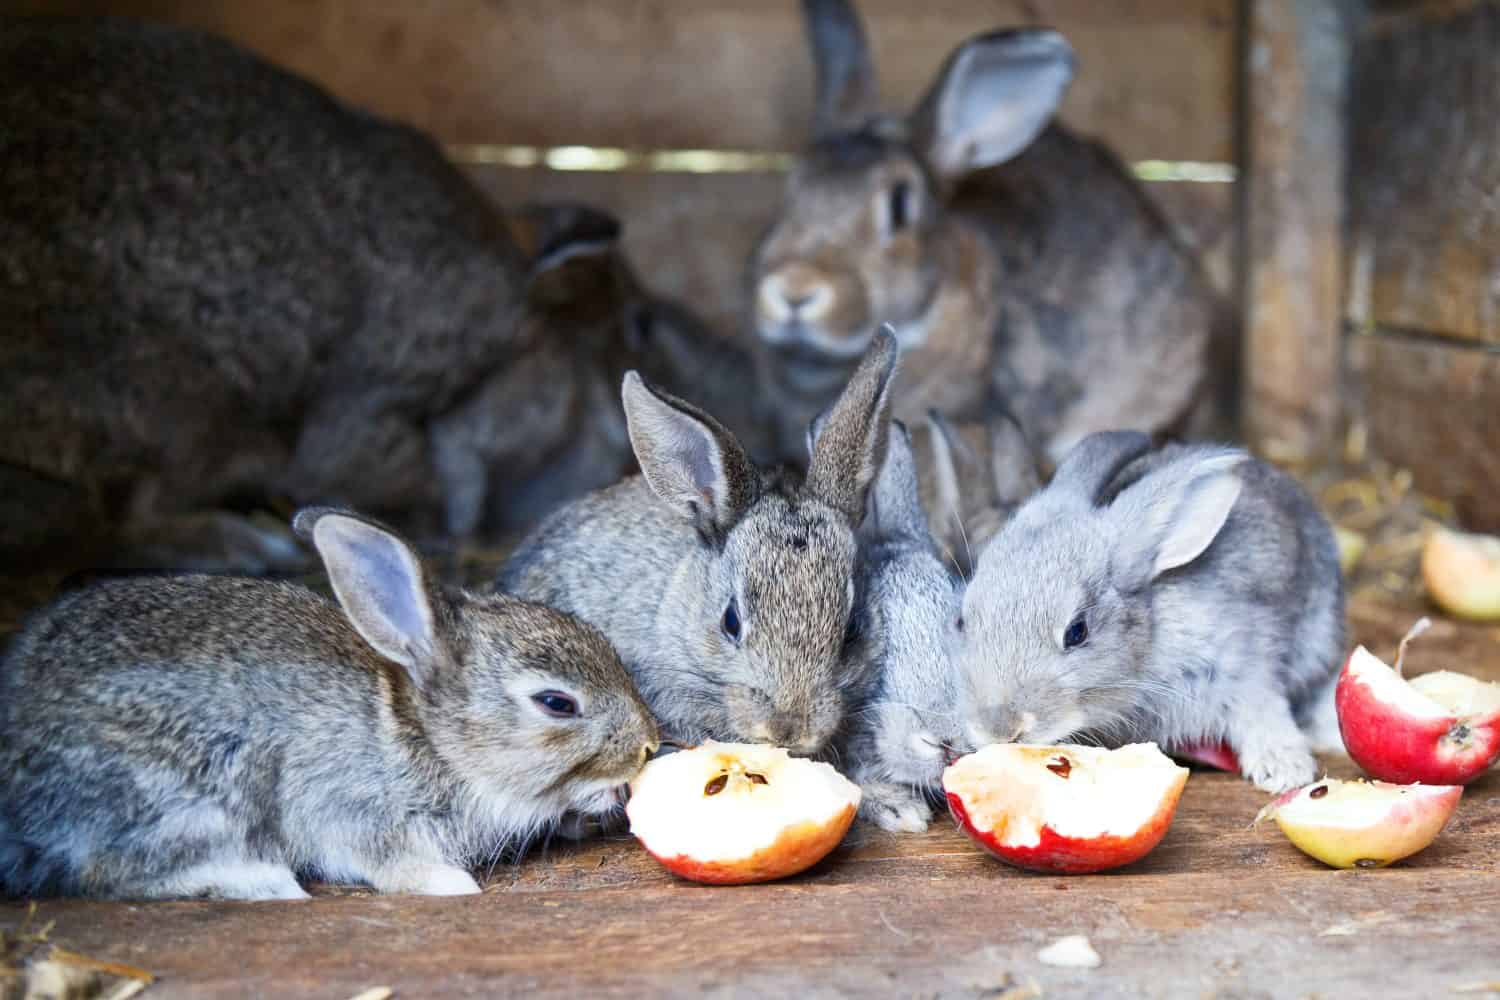 Rabbits eating red apples